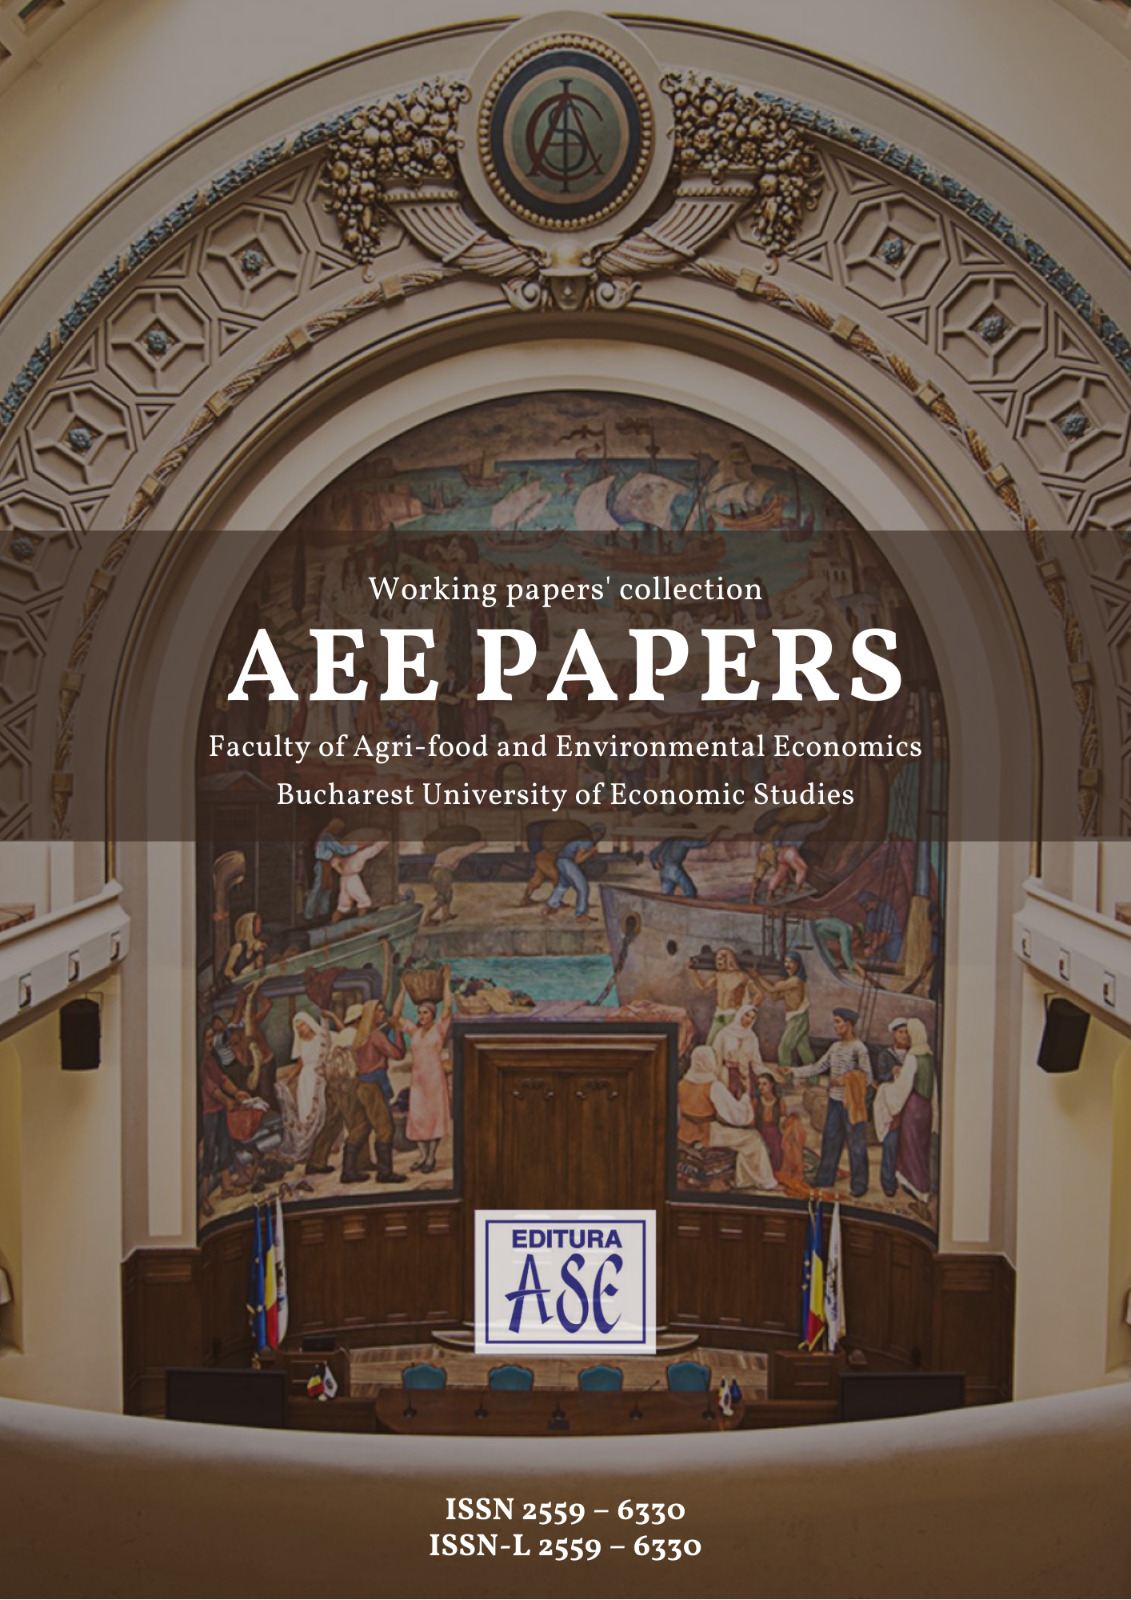 Working papers' collection AEE Papers